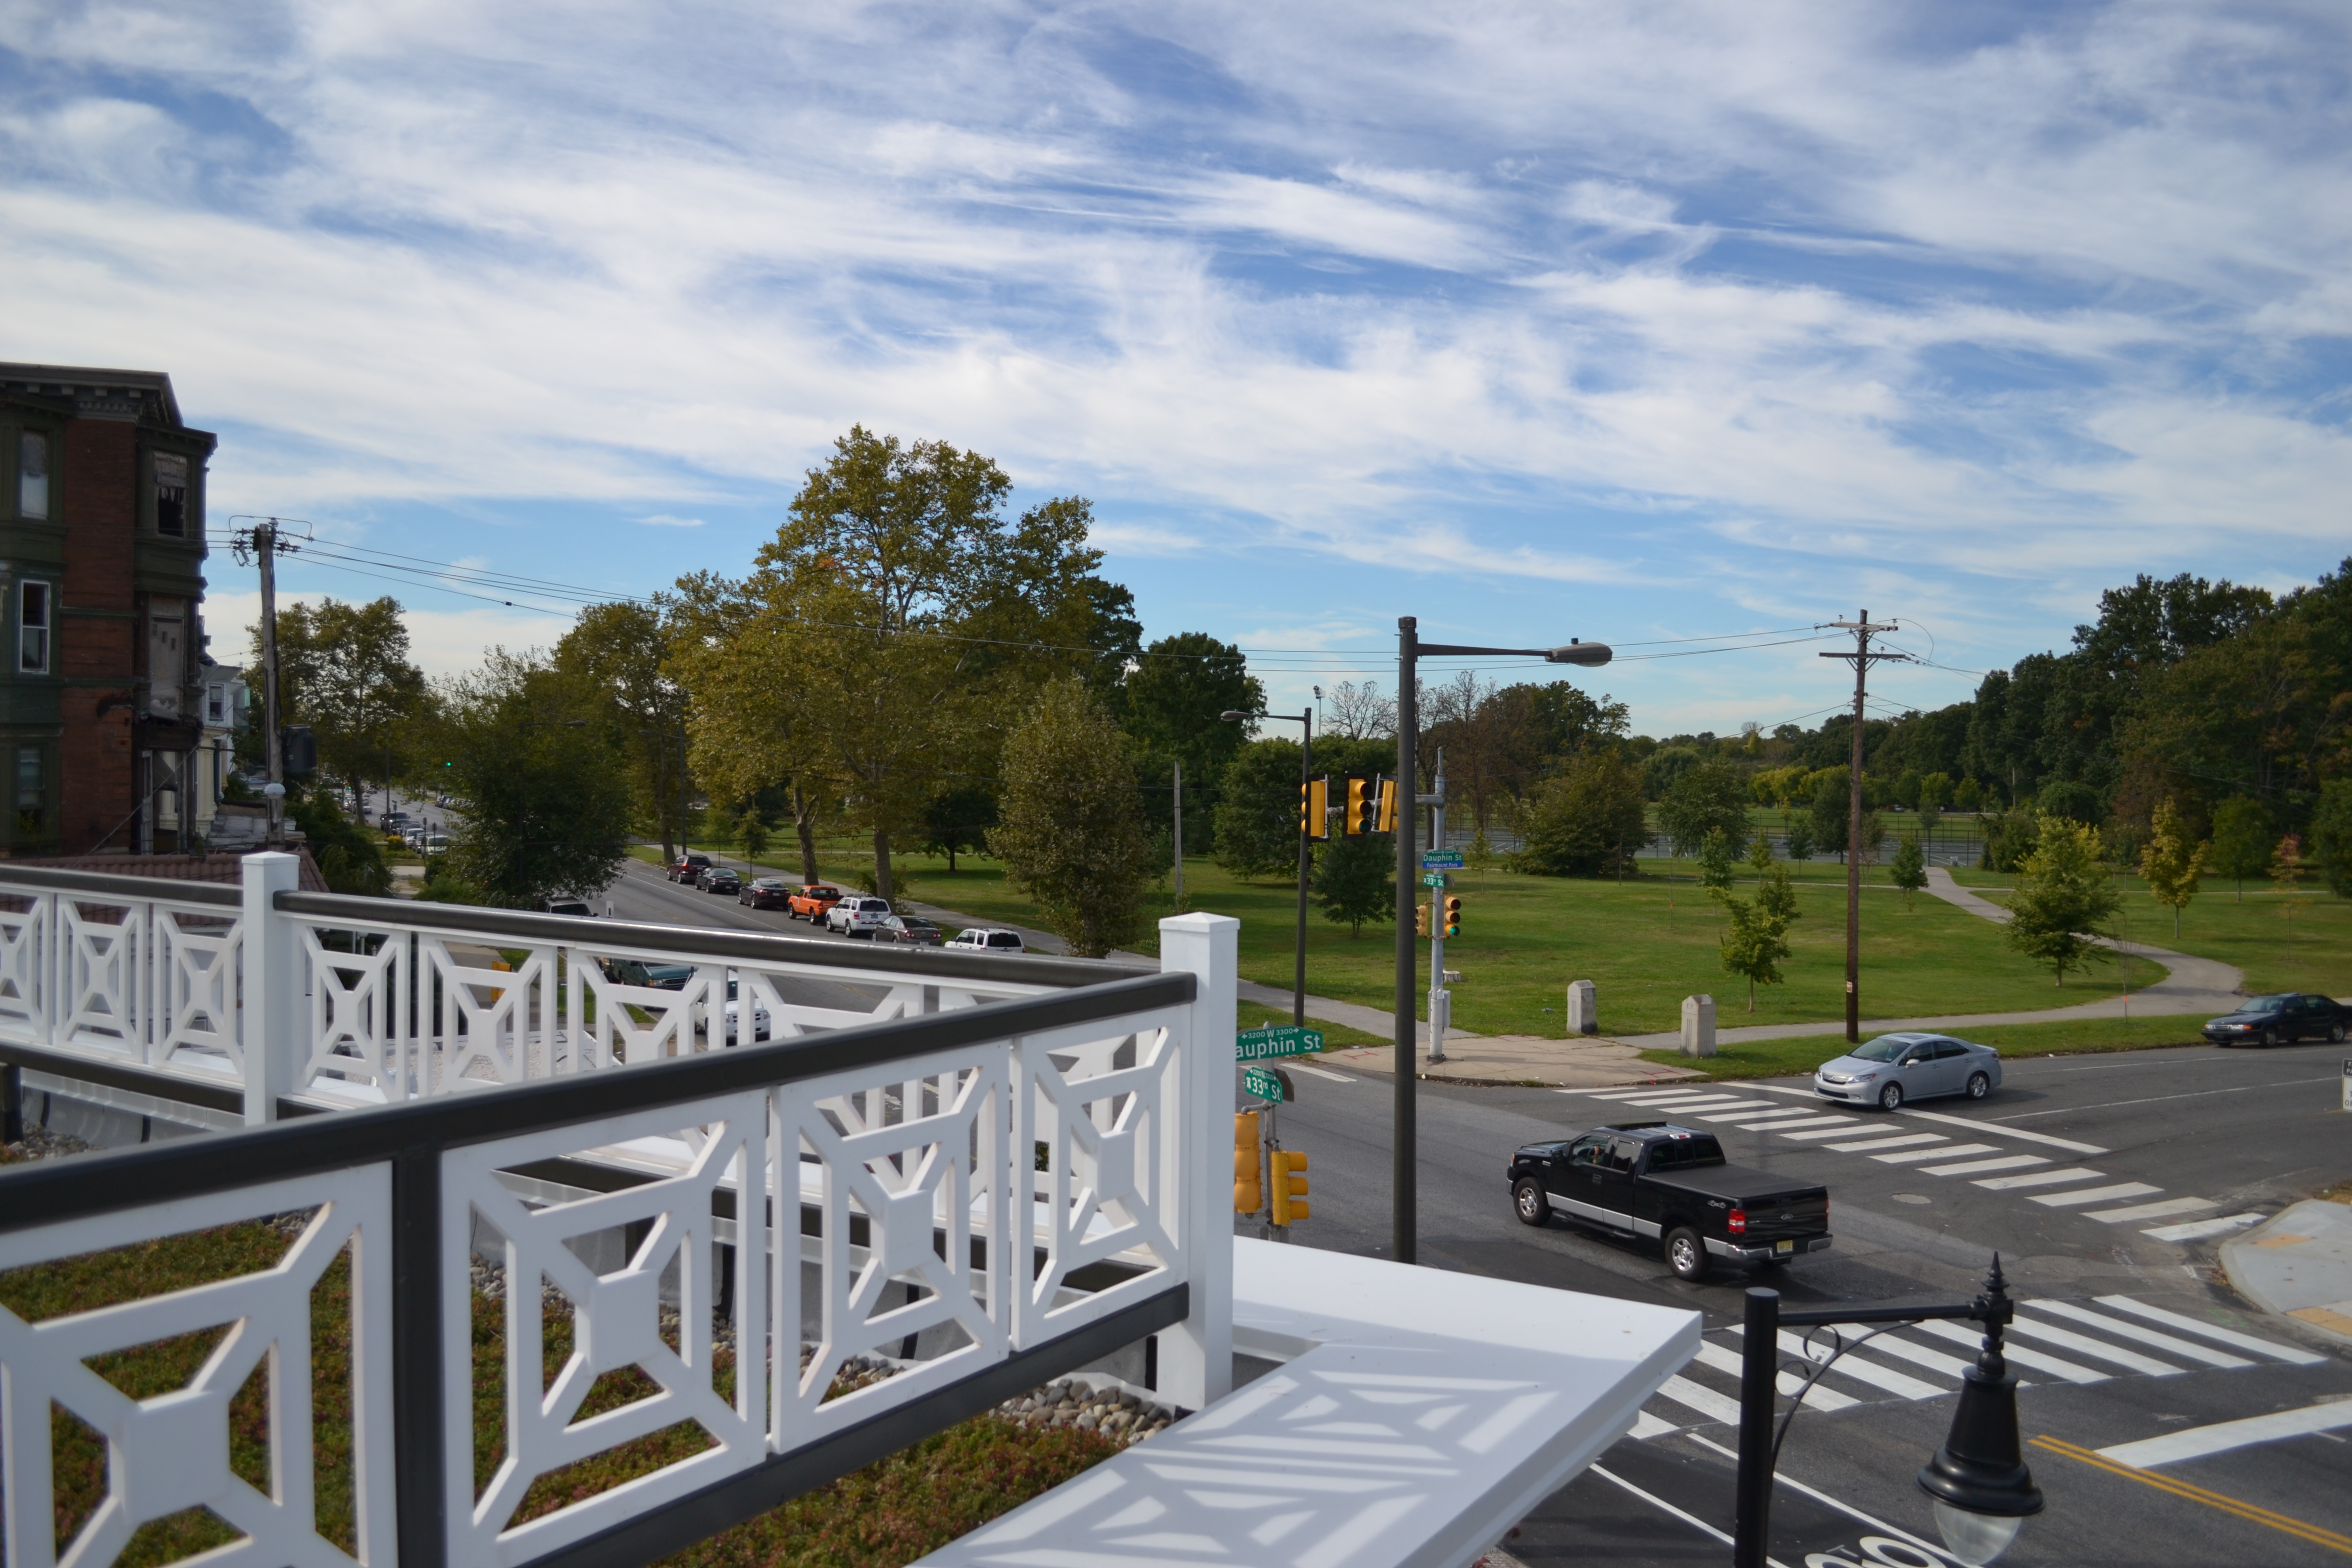 From the roof, it is easy to see the bus loop's proximity to Fairmount Park